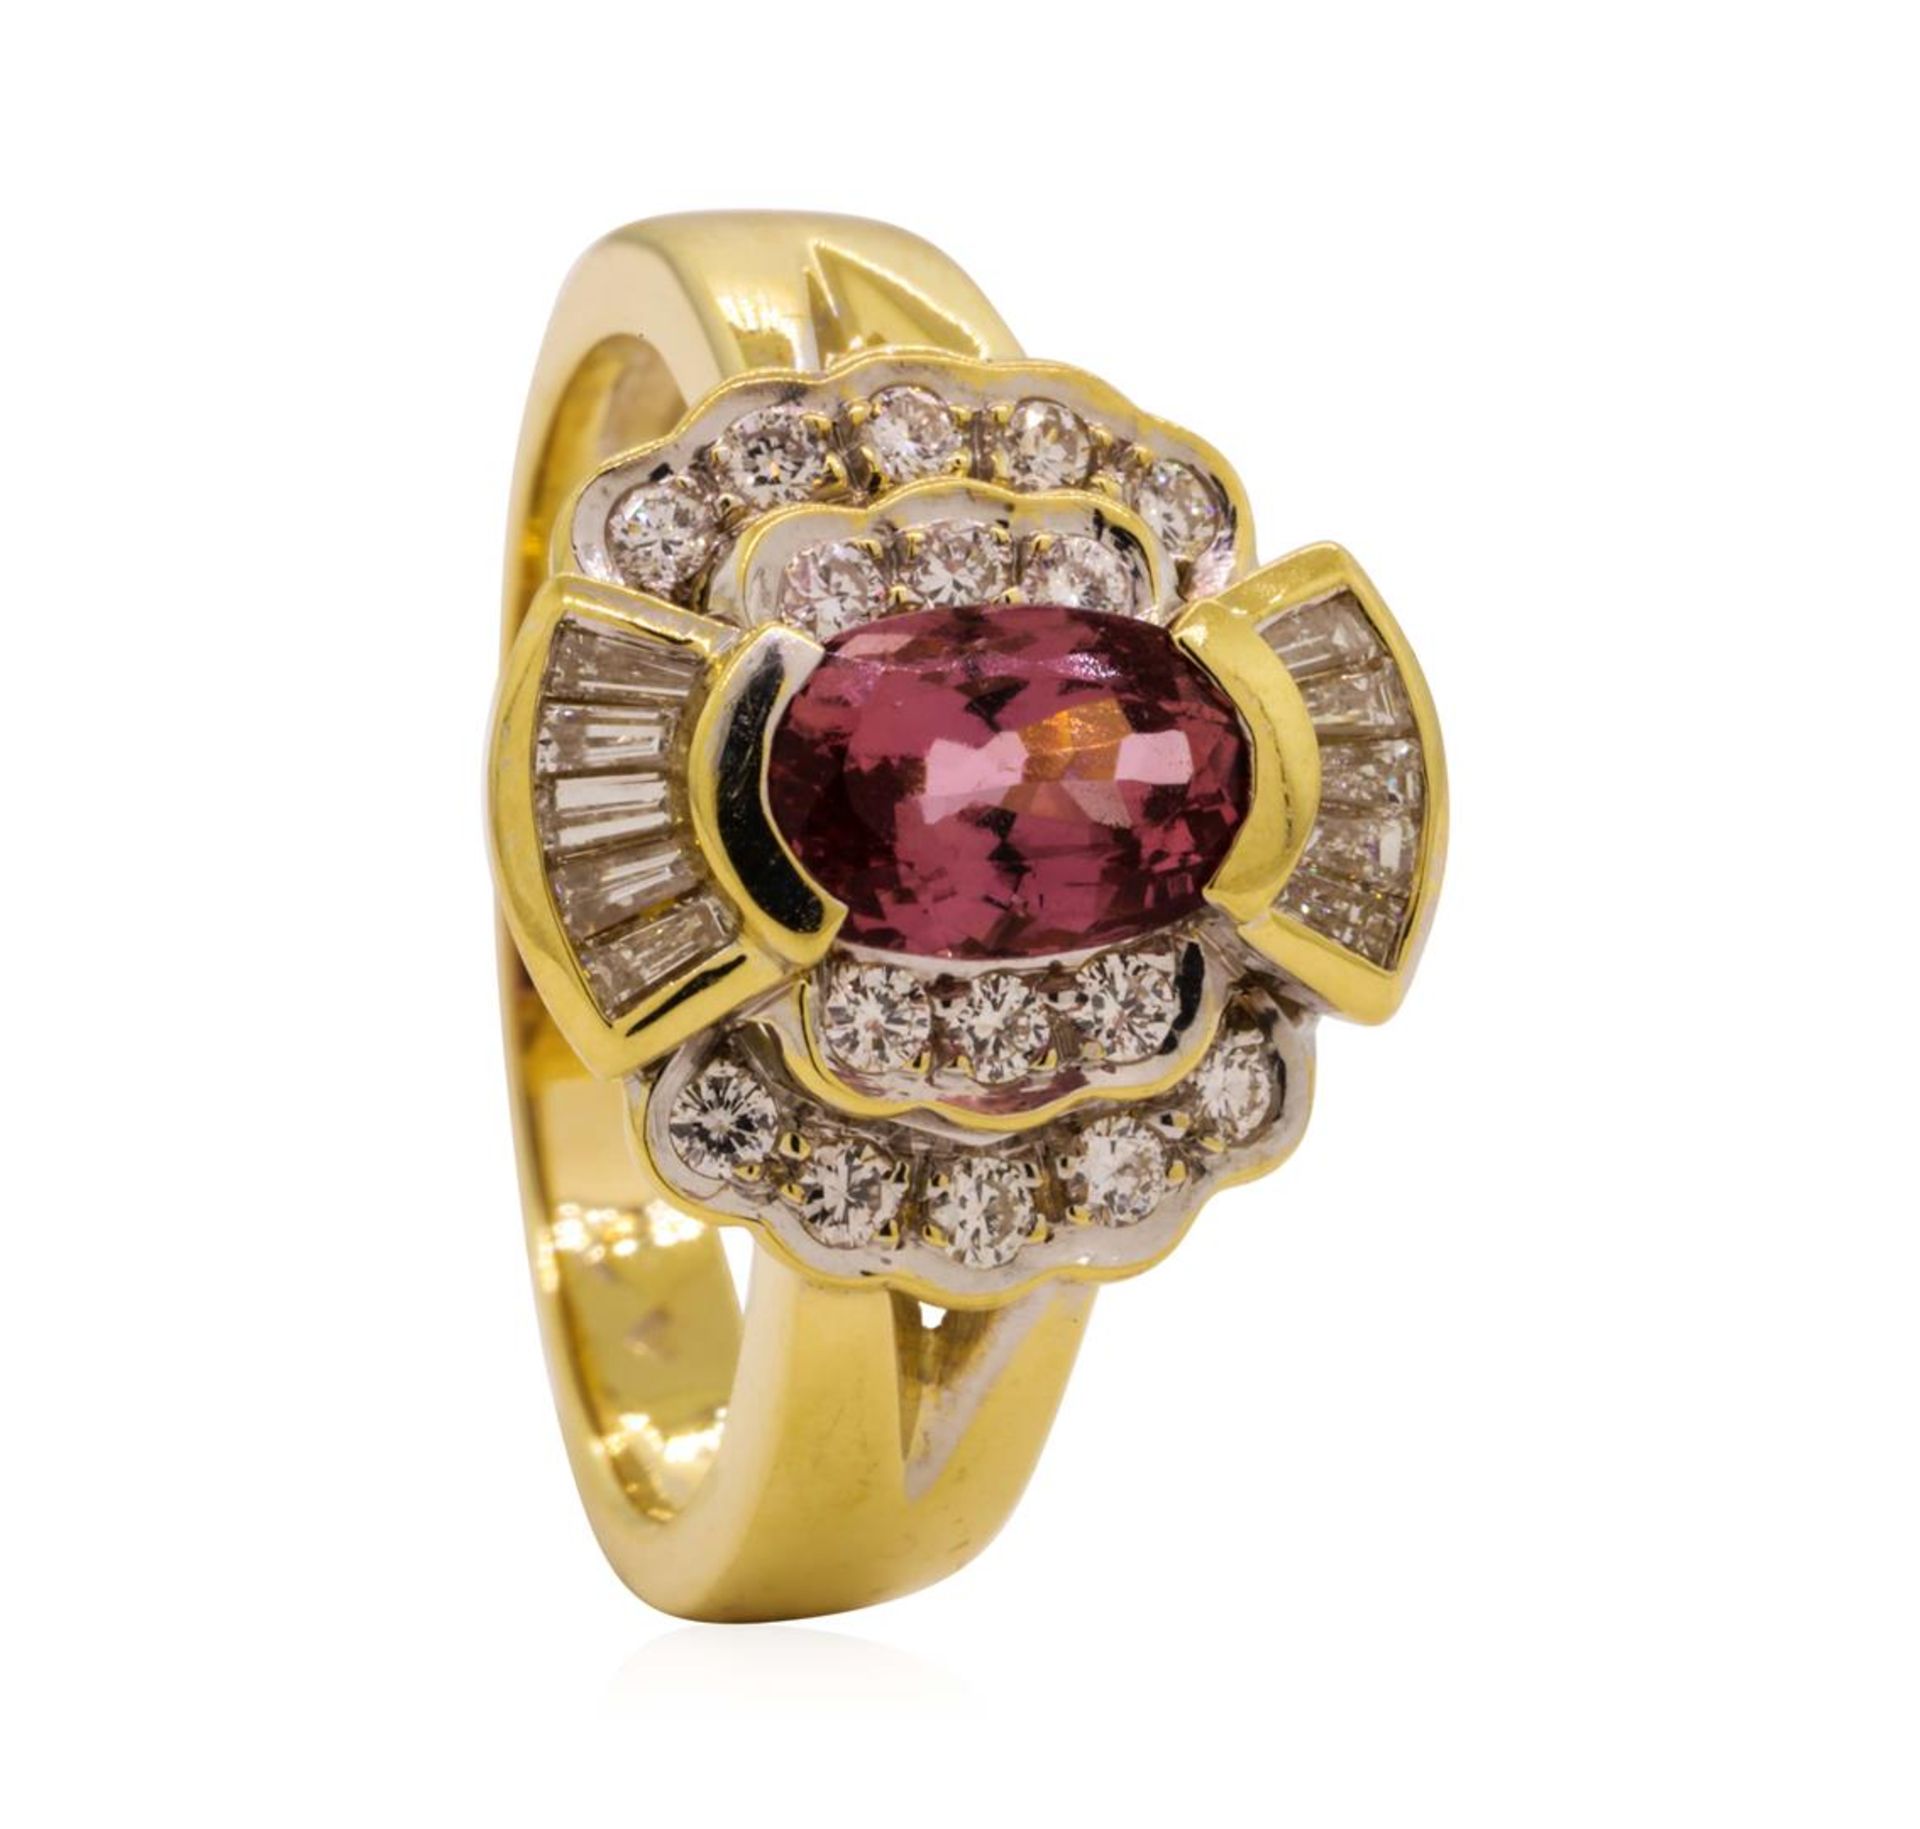 1.82 ctw Pink Spinel and Diamond Ring - 18KT Yellow Gold - Image 4 of 5